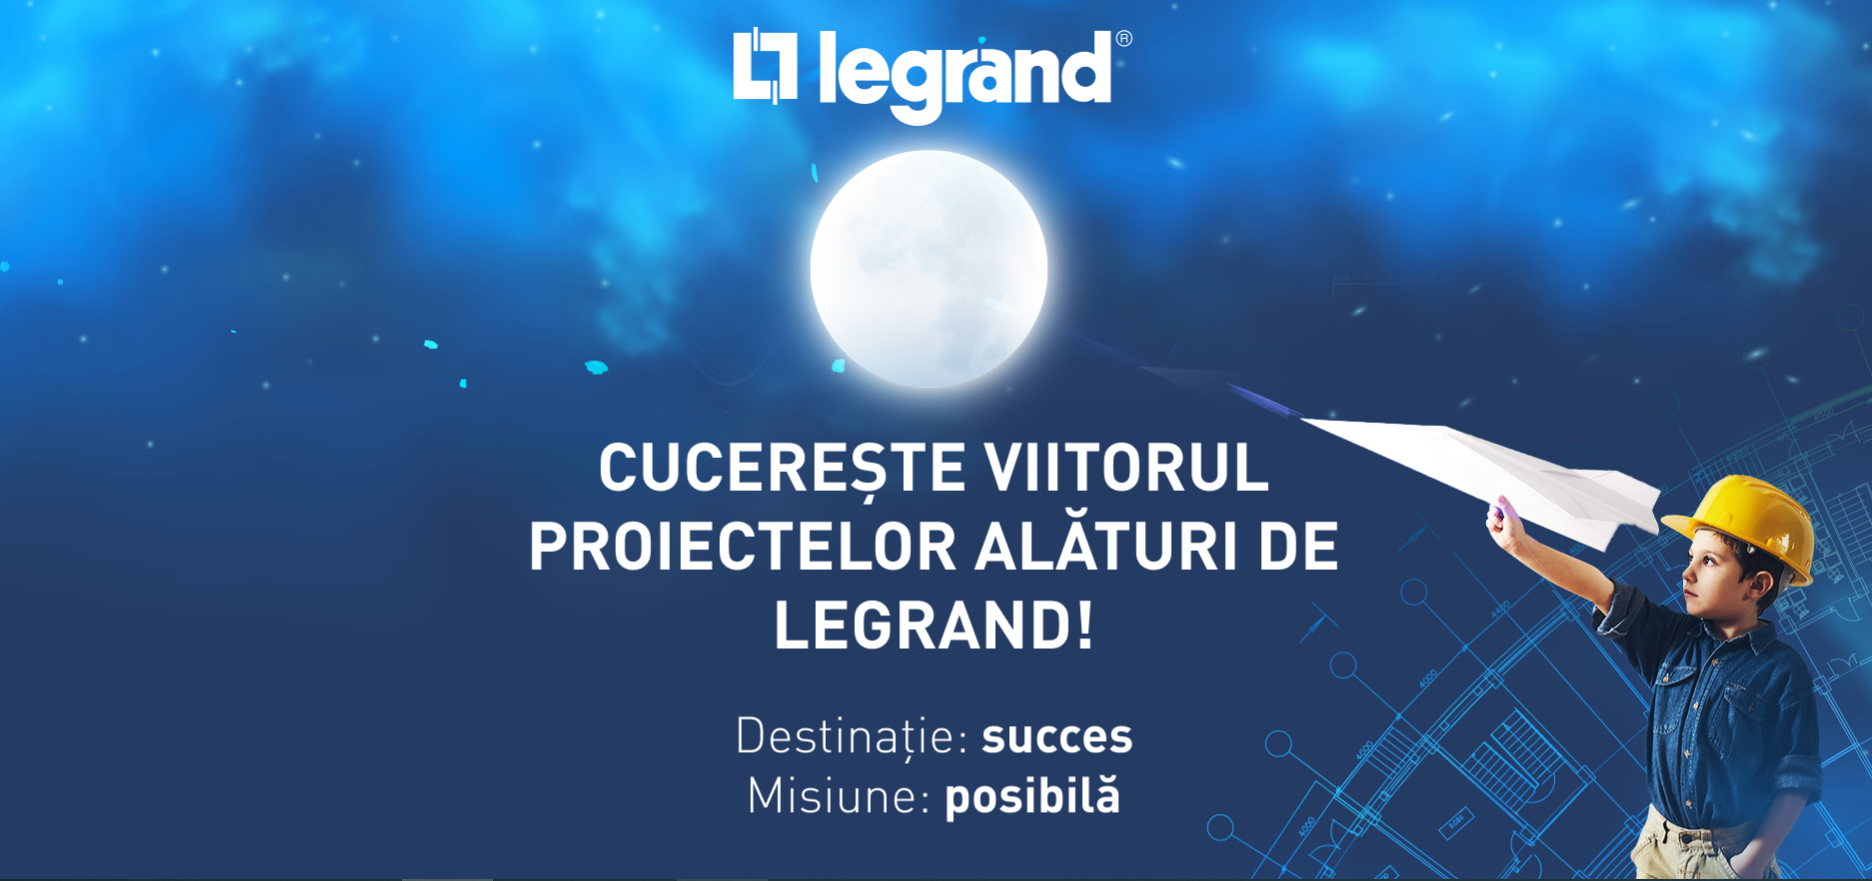 White Image and Legrand launched “Conquer the future of your projects with Legrand” campaign and reward their partners